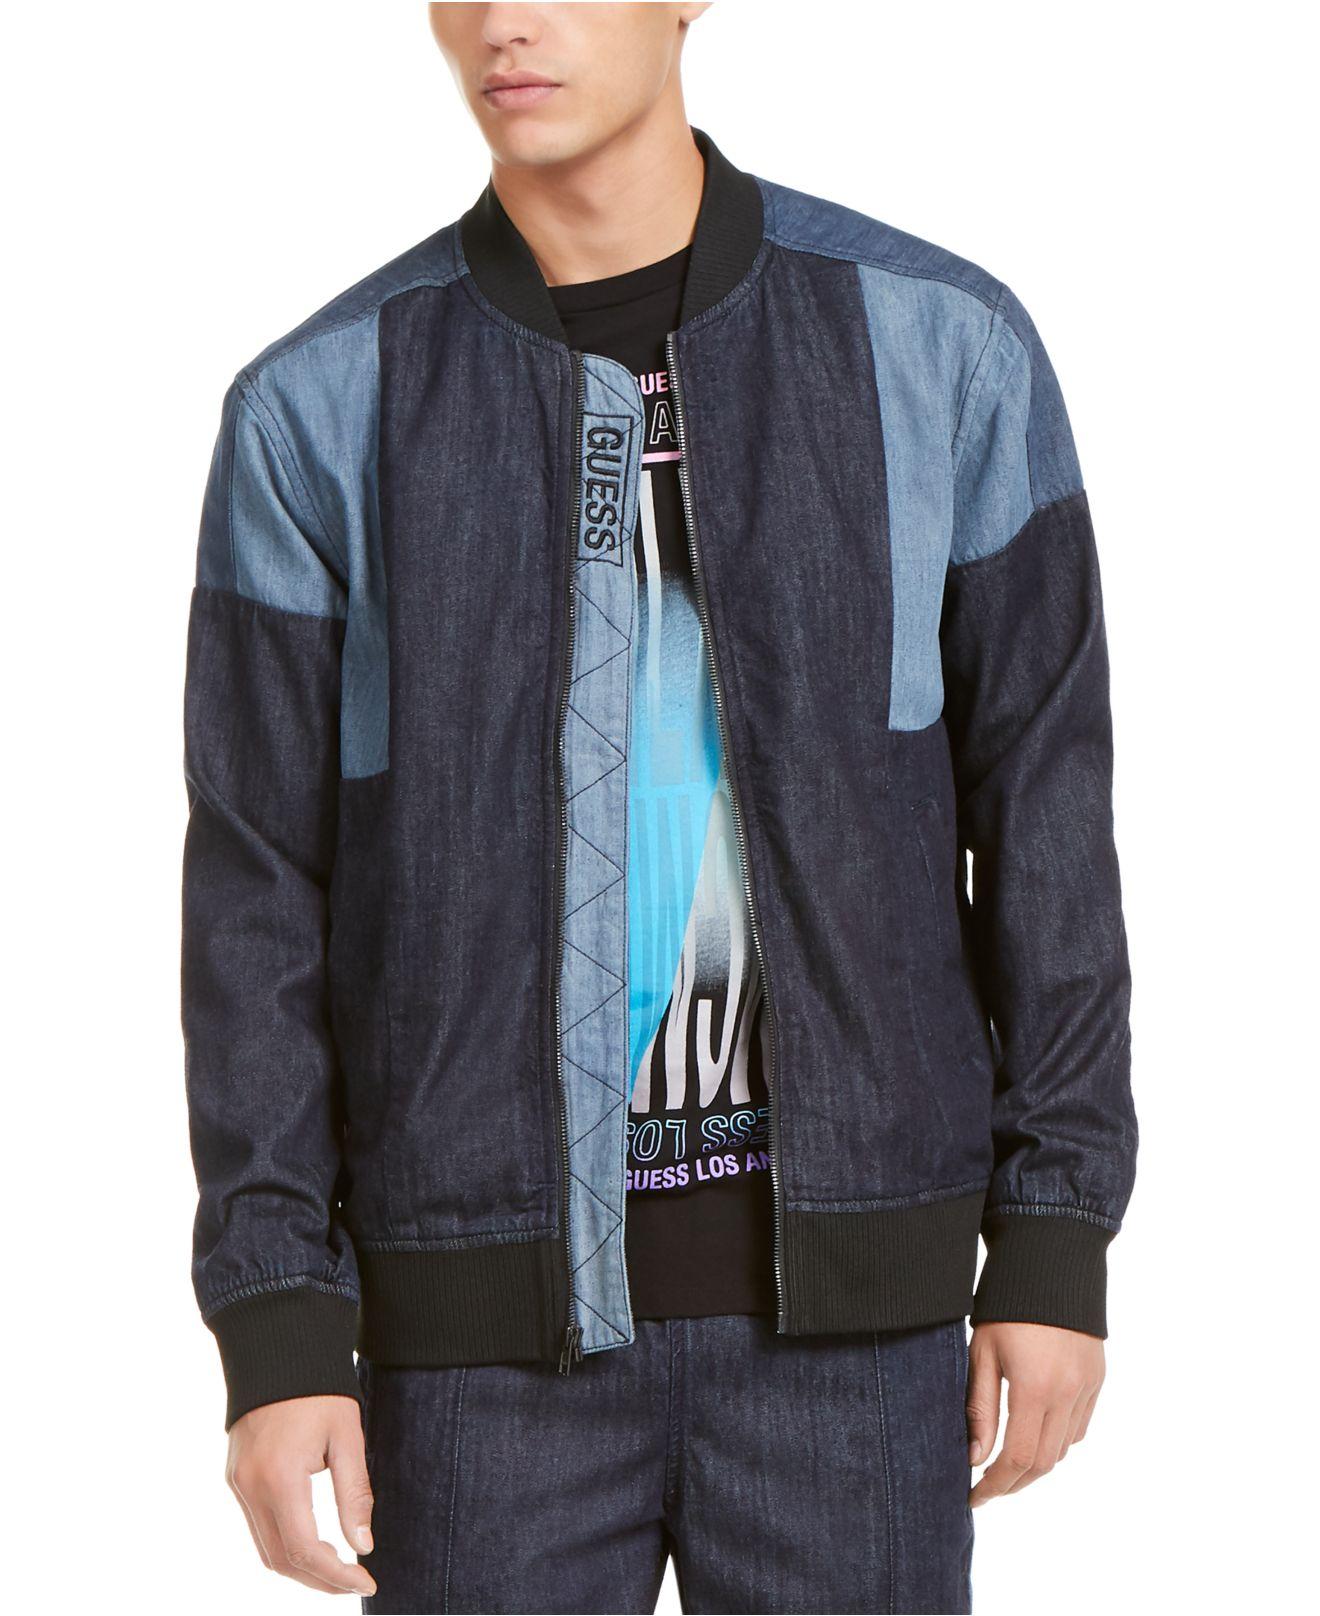 Guess Cotton Chambray Track Bomber Jacket in Blue for Men - Lyst